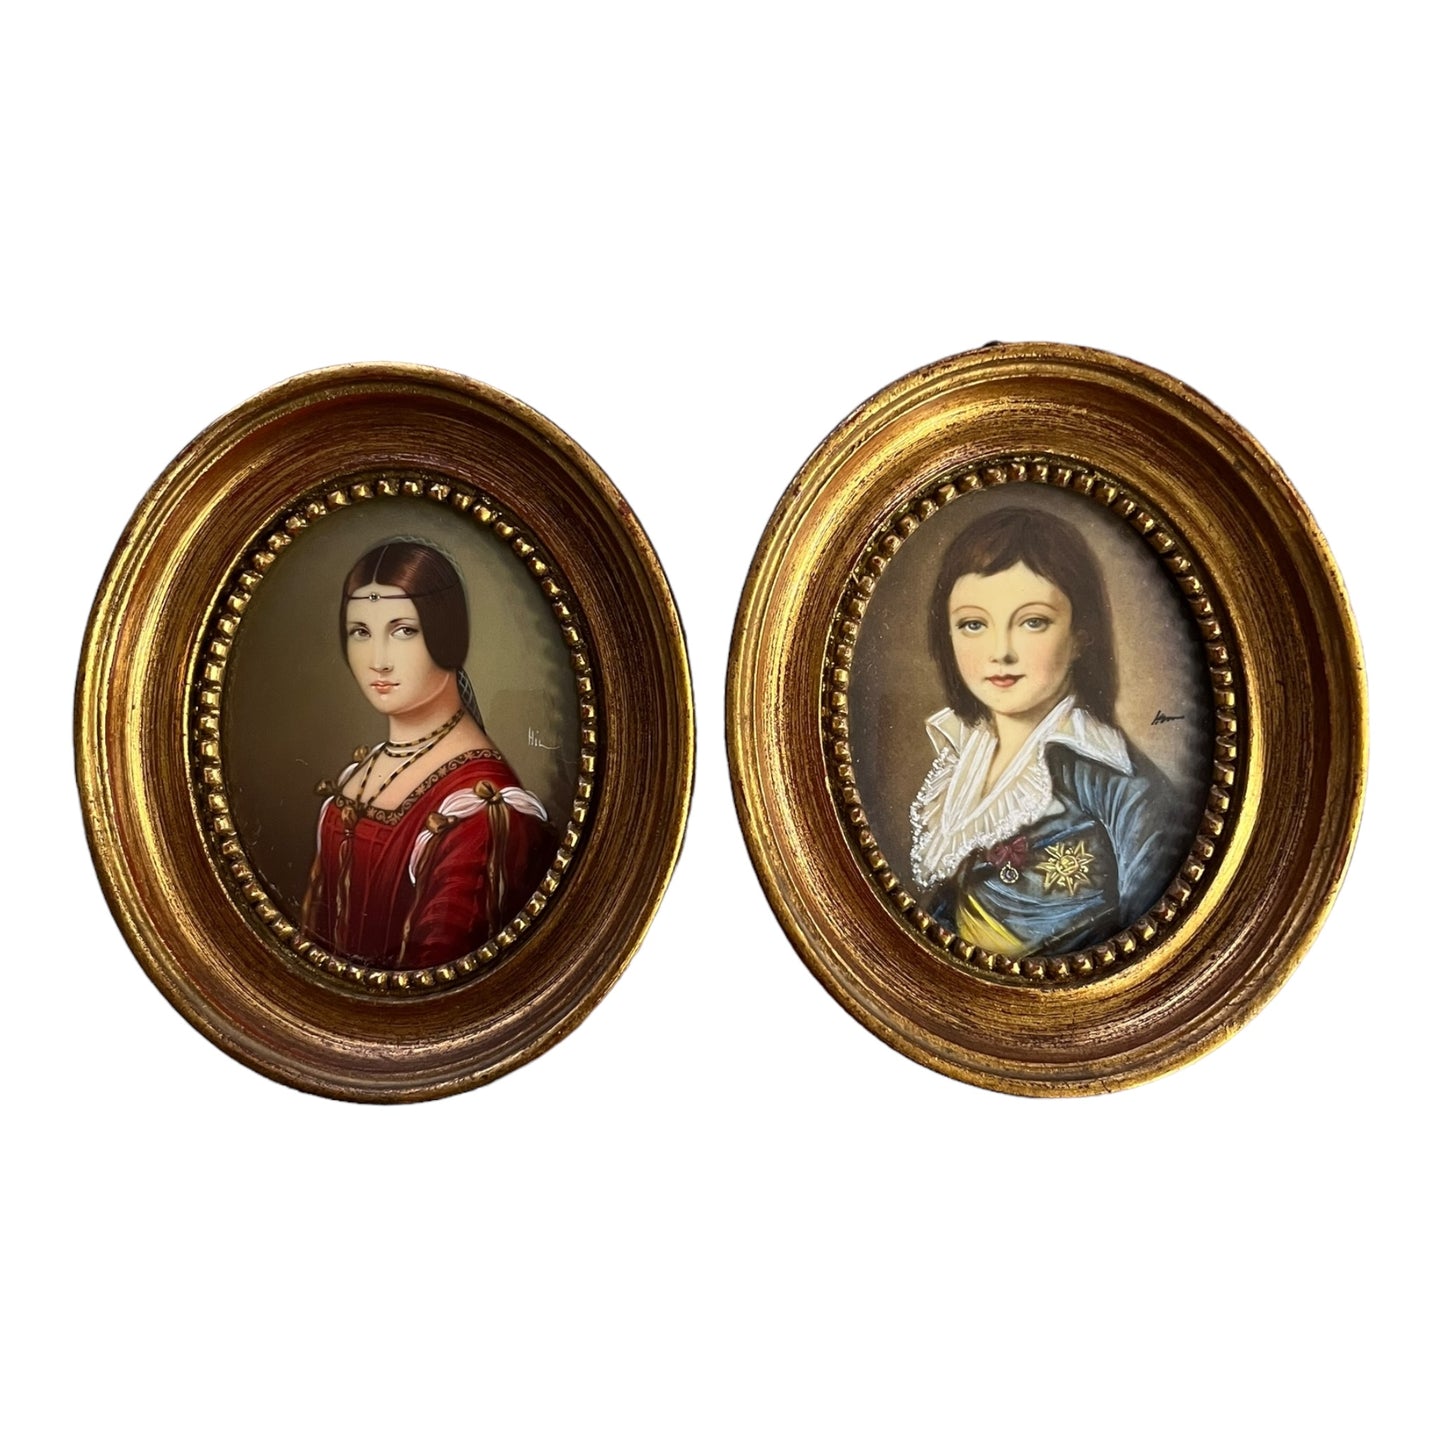 Louis XVII and a lady pair of portraits of Hil on ivory